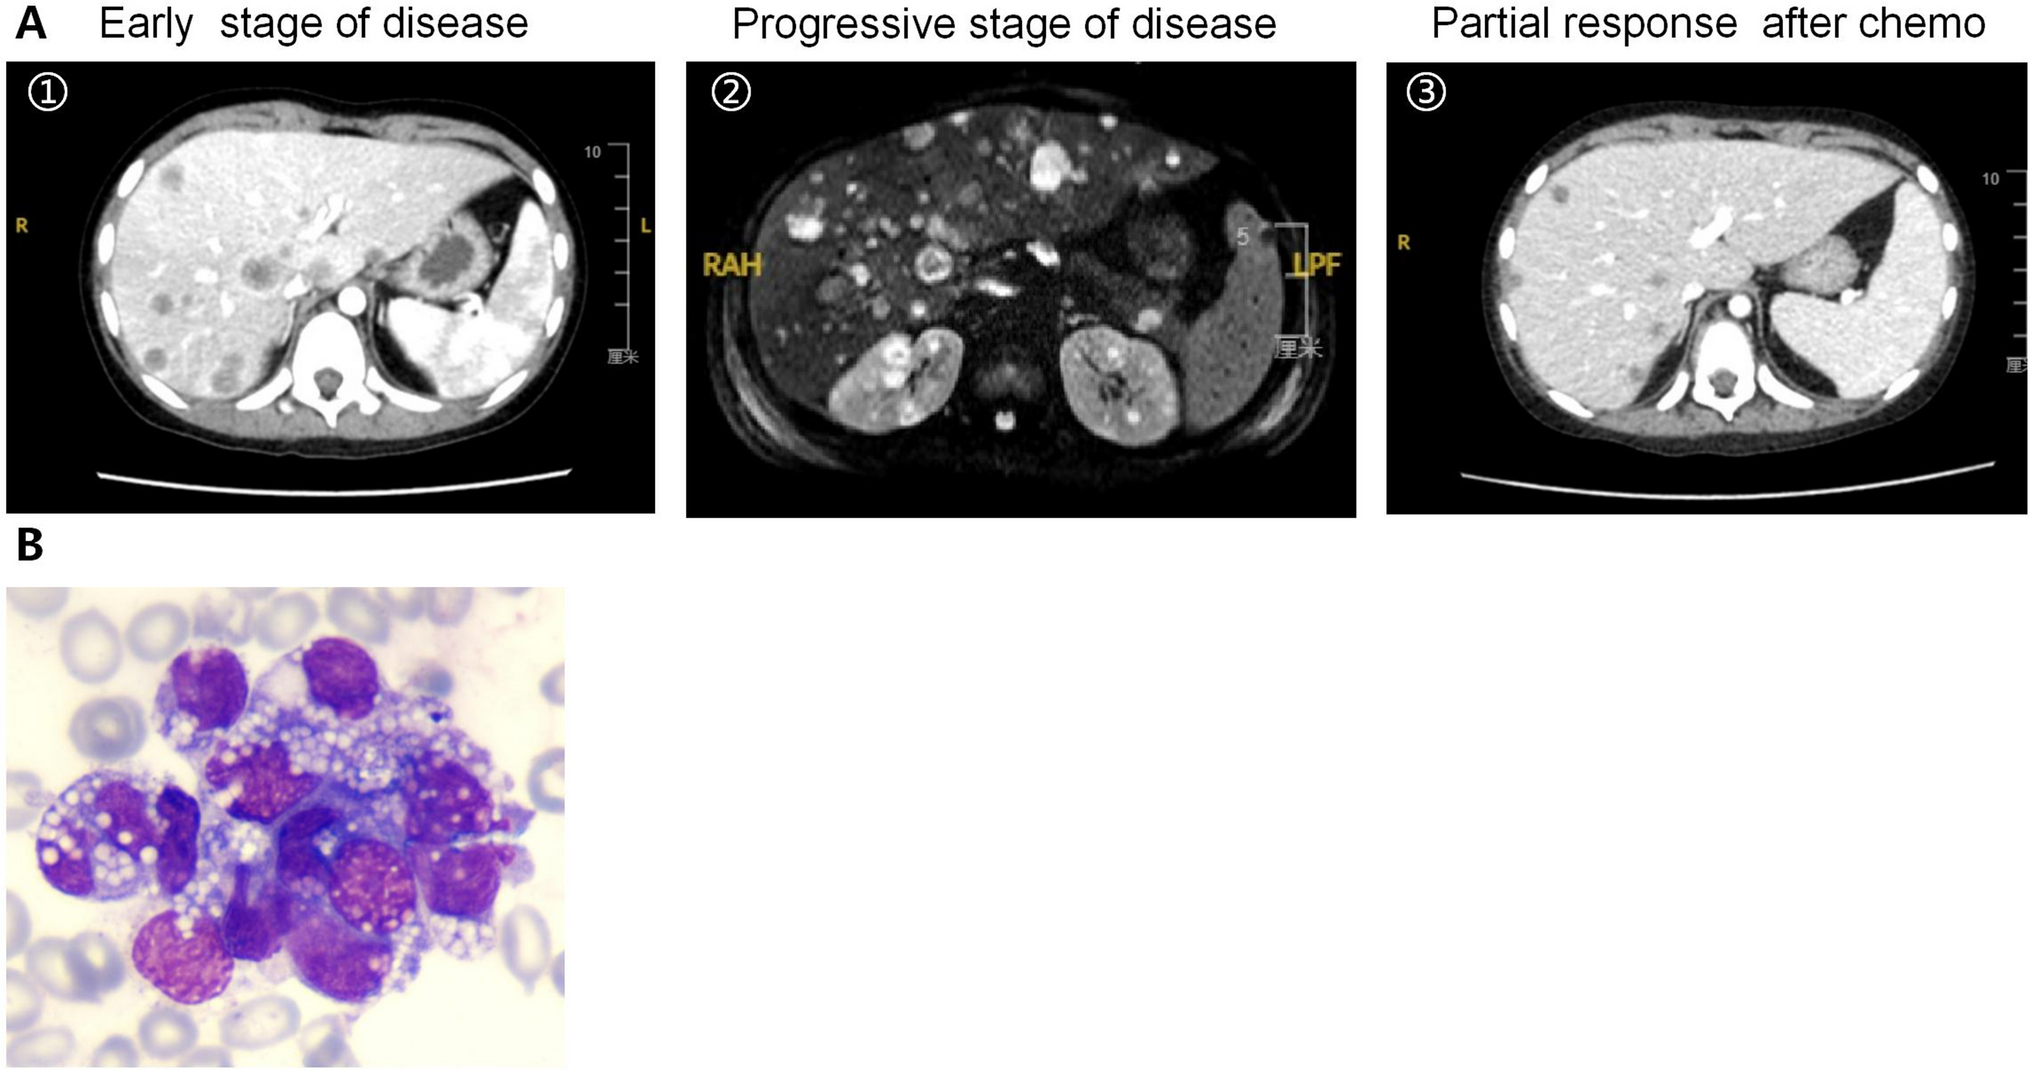 Histiocytic sarcoma following CAR T-cell therapy: a case report